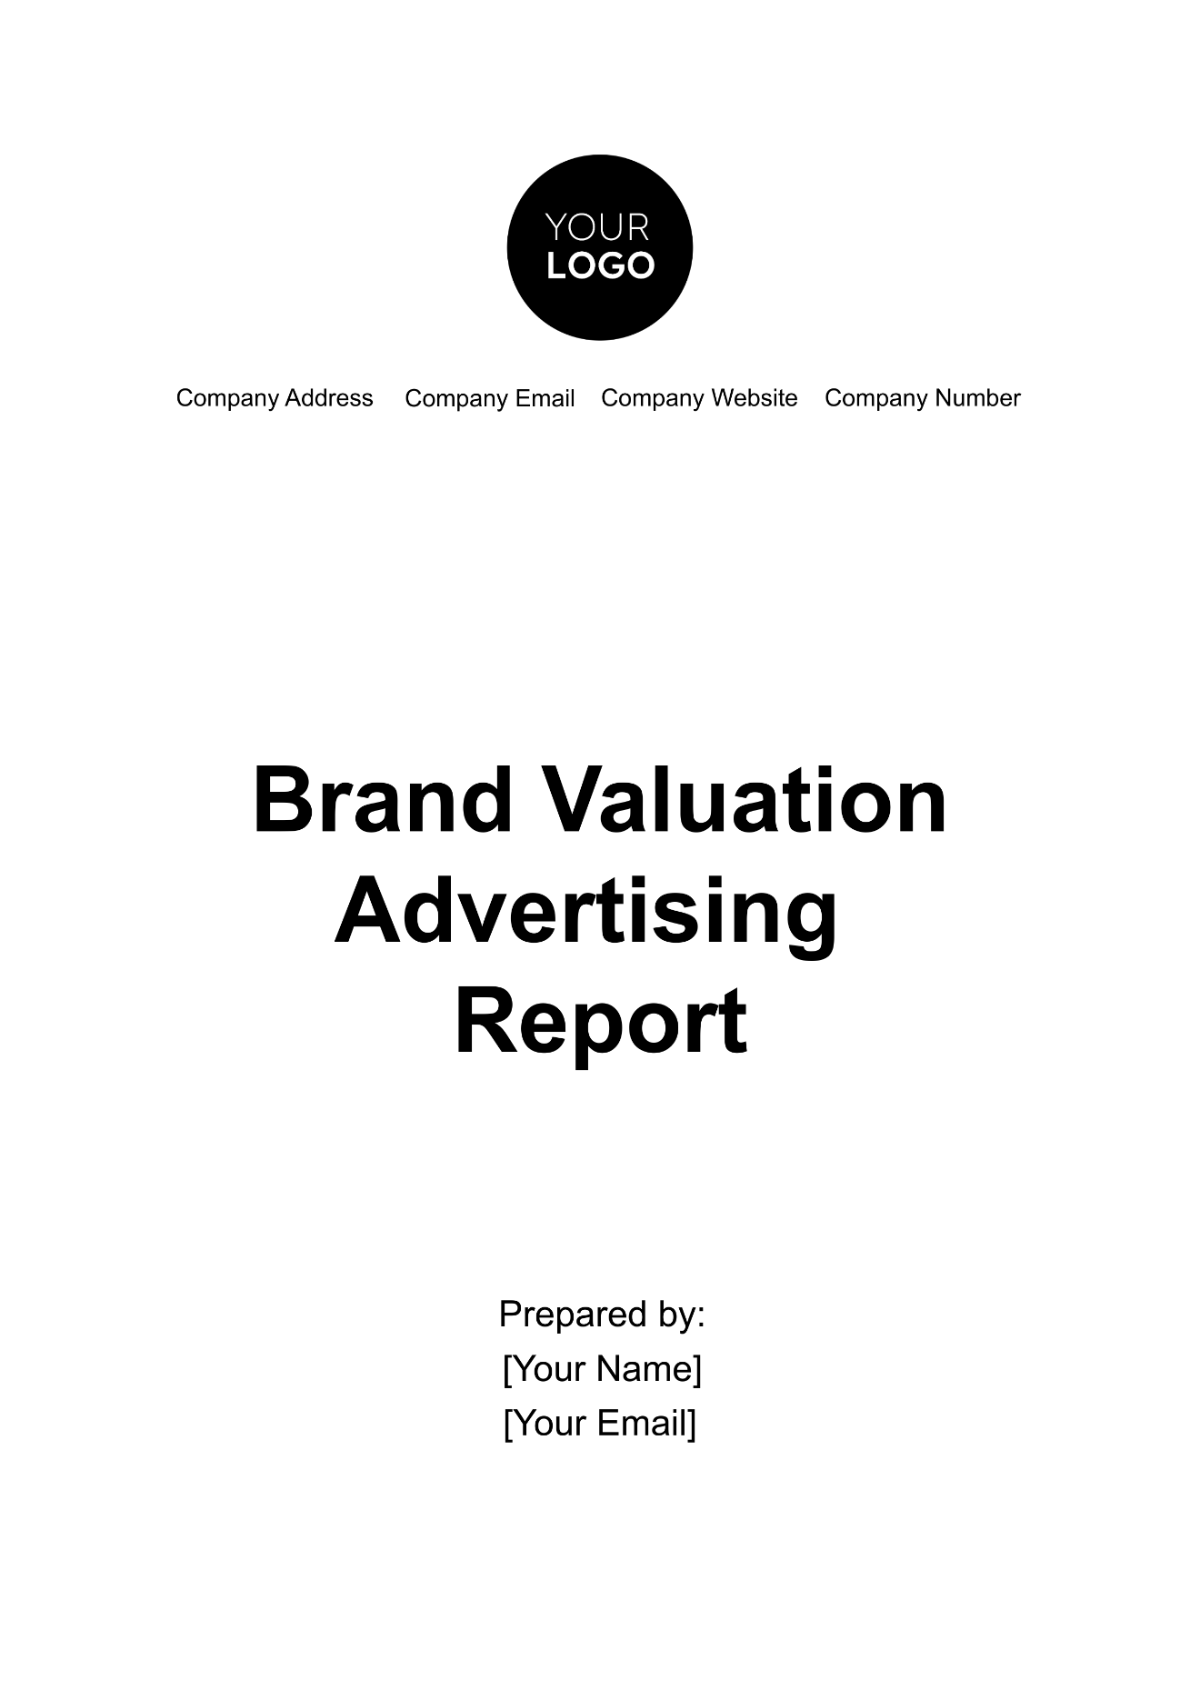 Brand Valuation Advertising Report Template